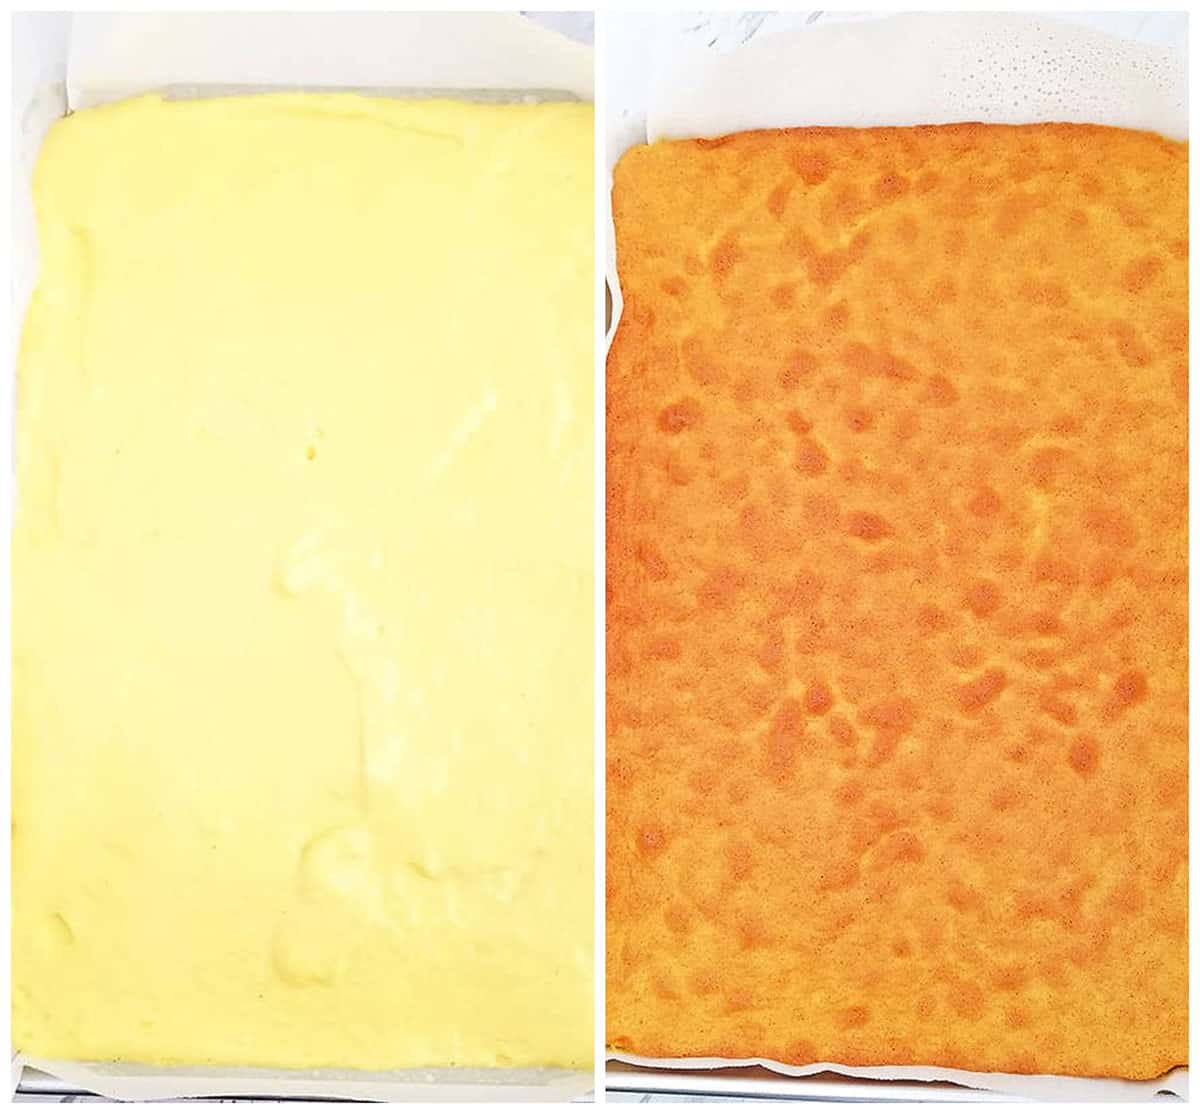 Once done, remove the cake from the oven and let it cool for about 2 – 3 minutes. This allows the cake sponge to moisten and separate from parchment paper.